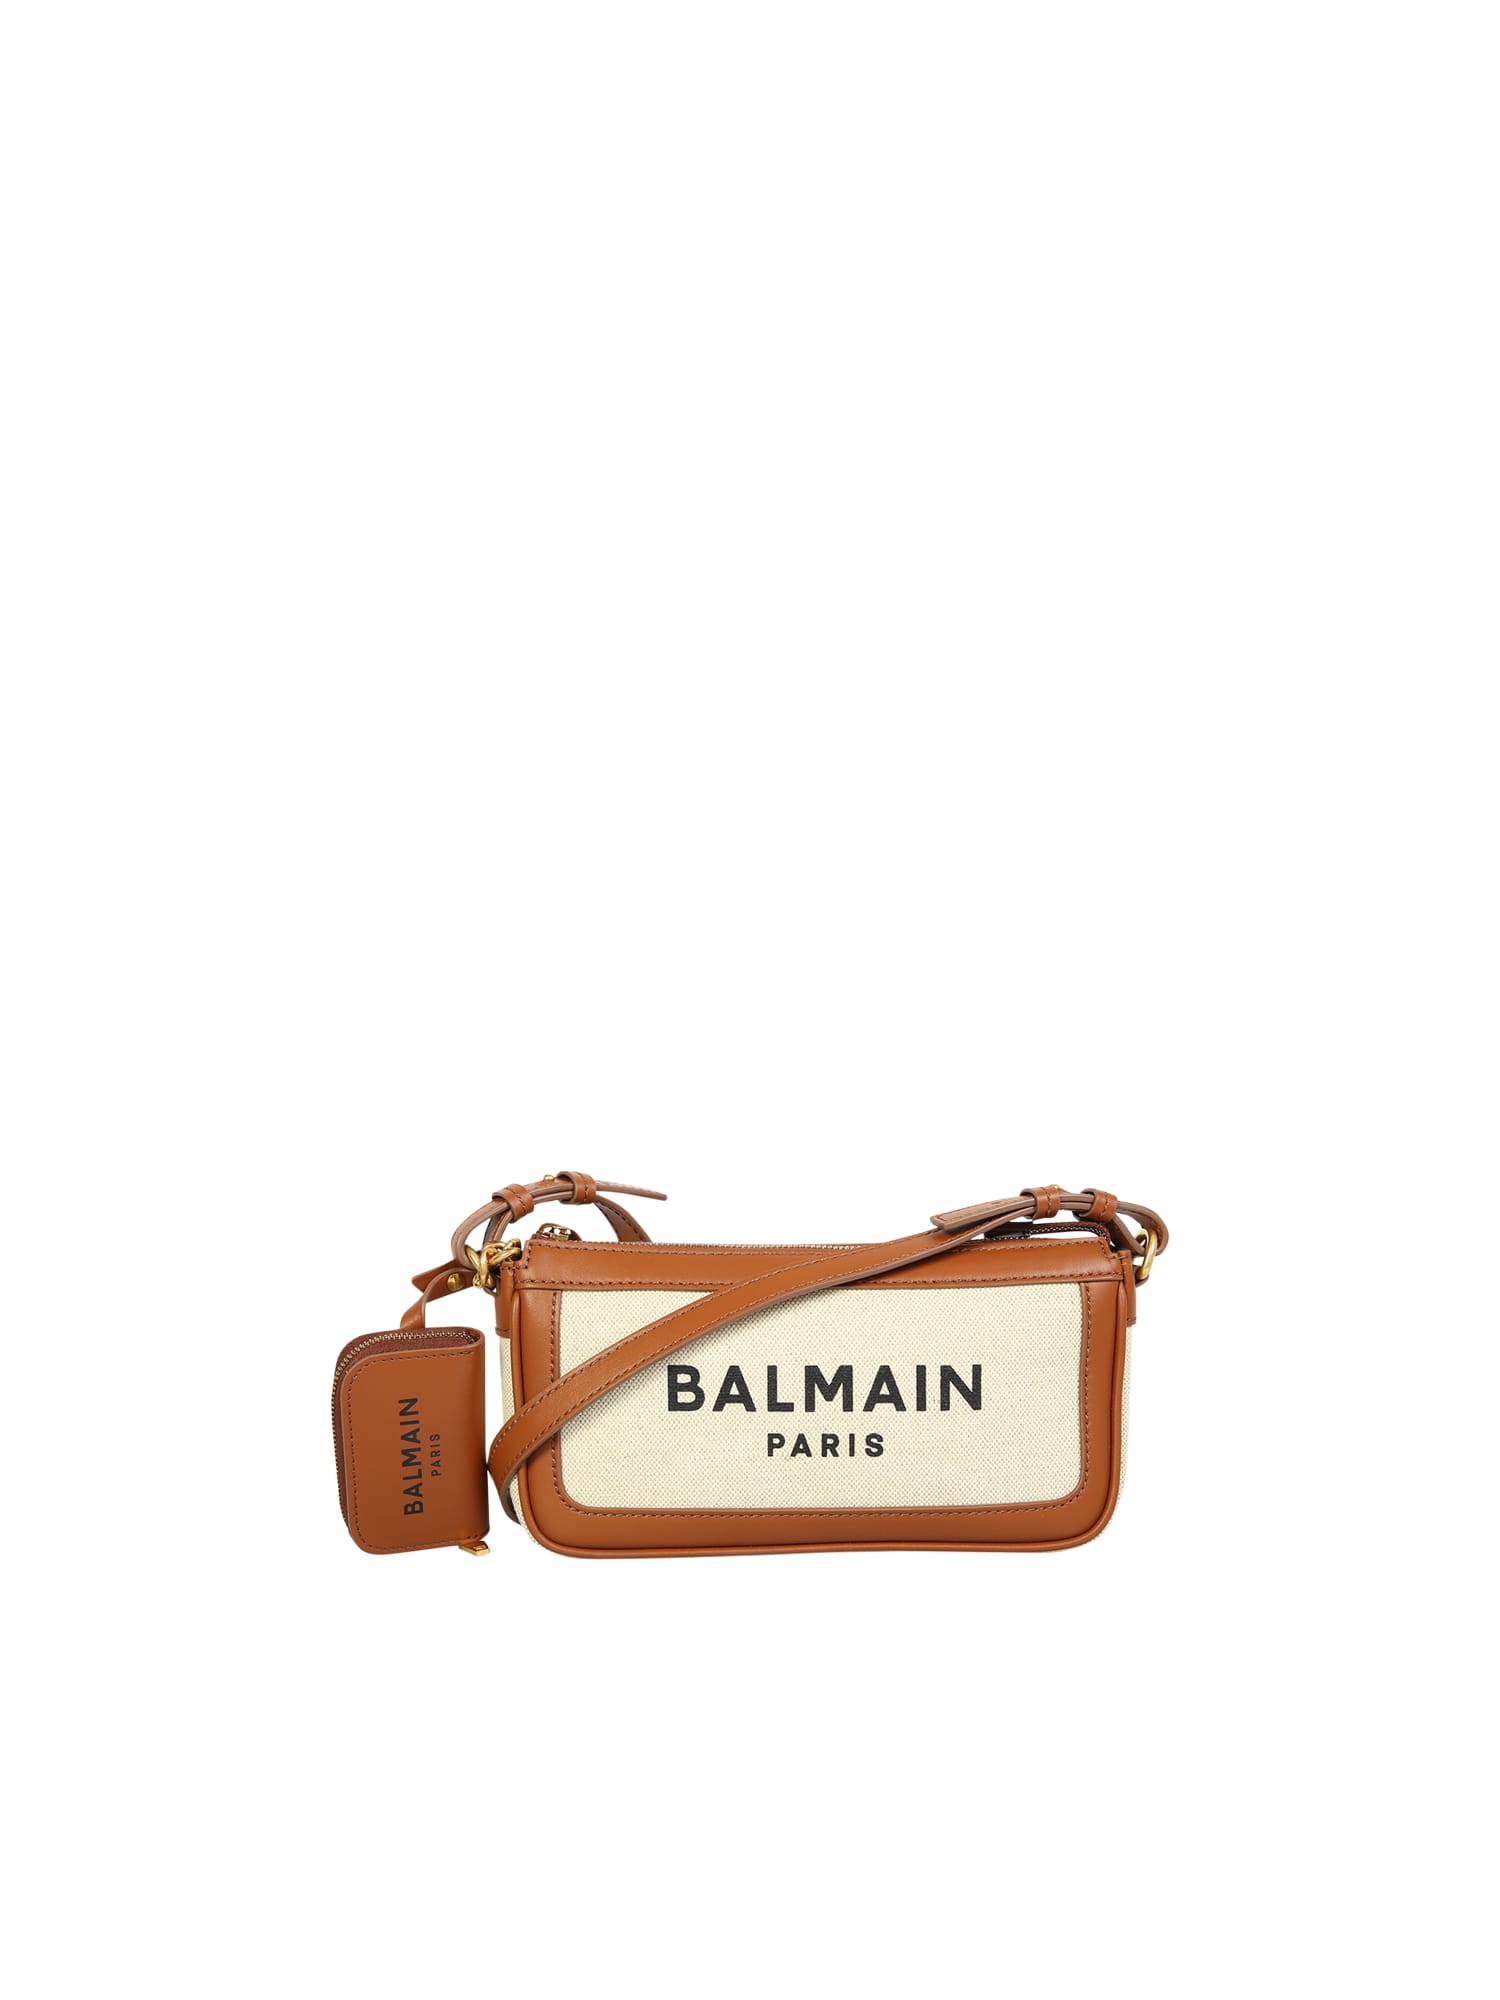 Balmain B-army Shoulder Bag; Practical, Essential And With A Casual Design